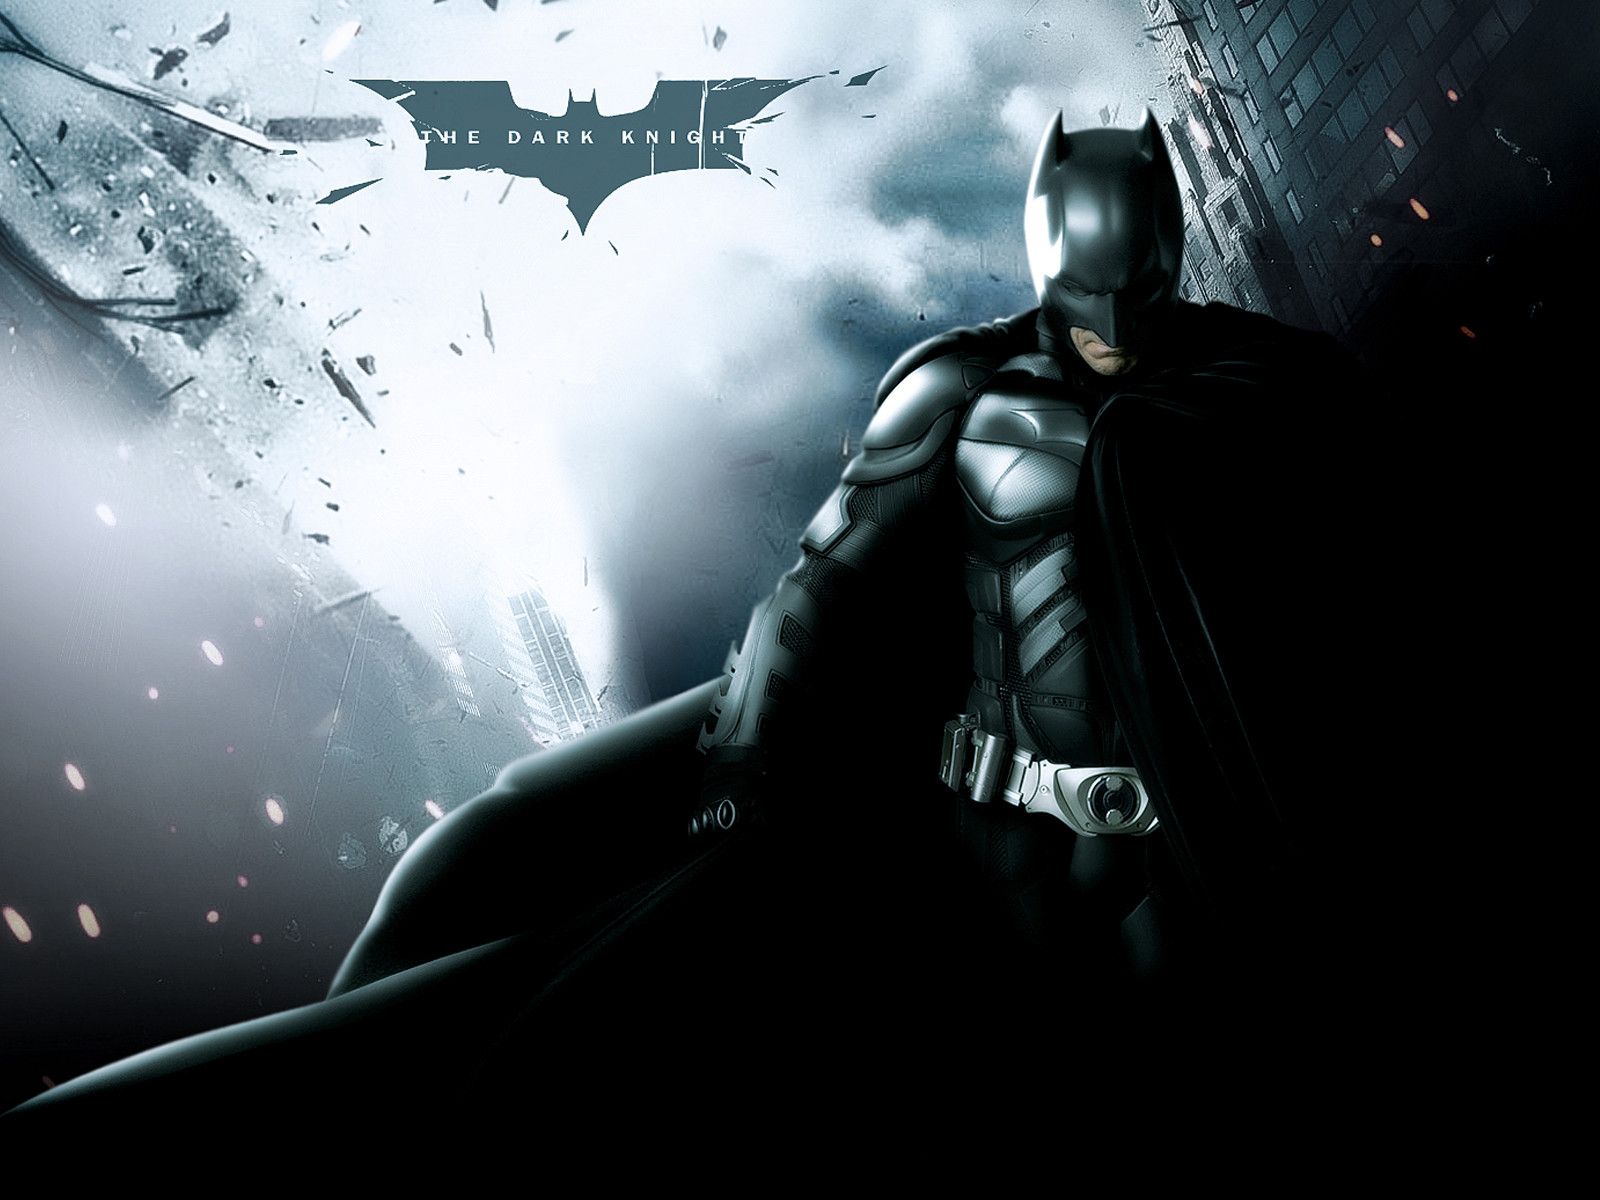 The Dark Knight Wallpaper Hd Resolution For Free Wallpaper - Watchful Protector Dark Knight Quote - HD Wallpaper 